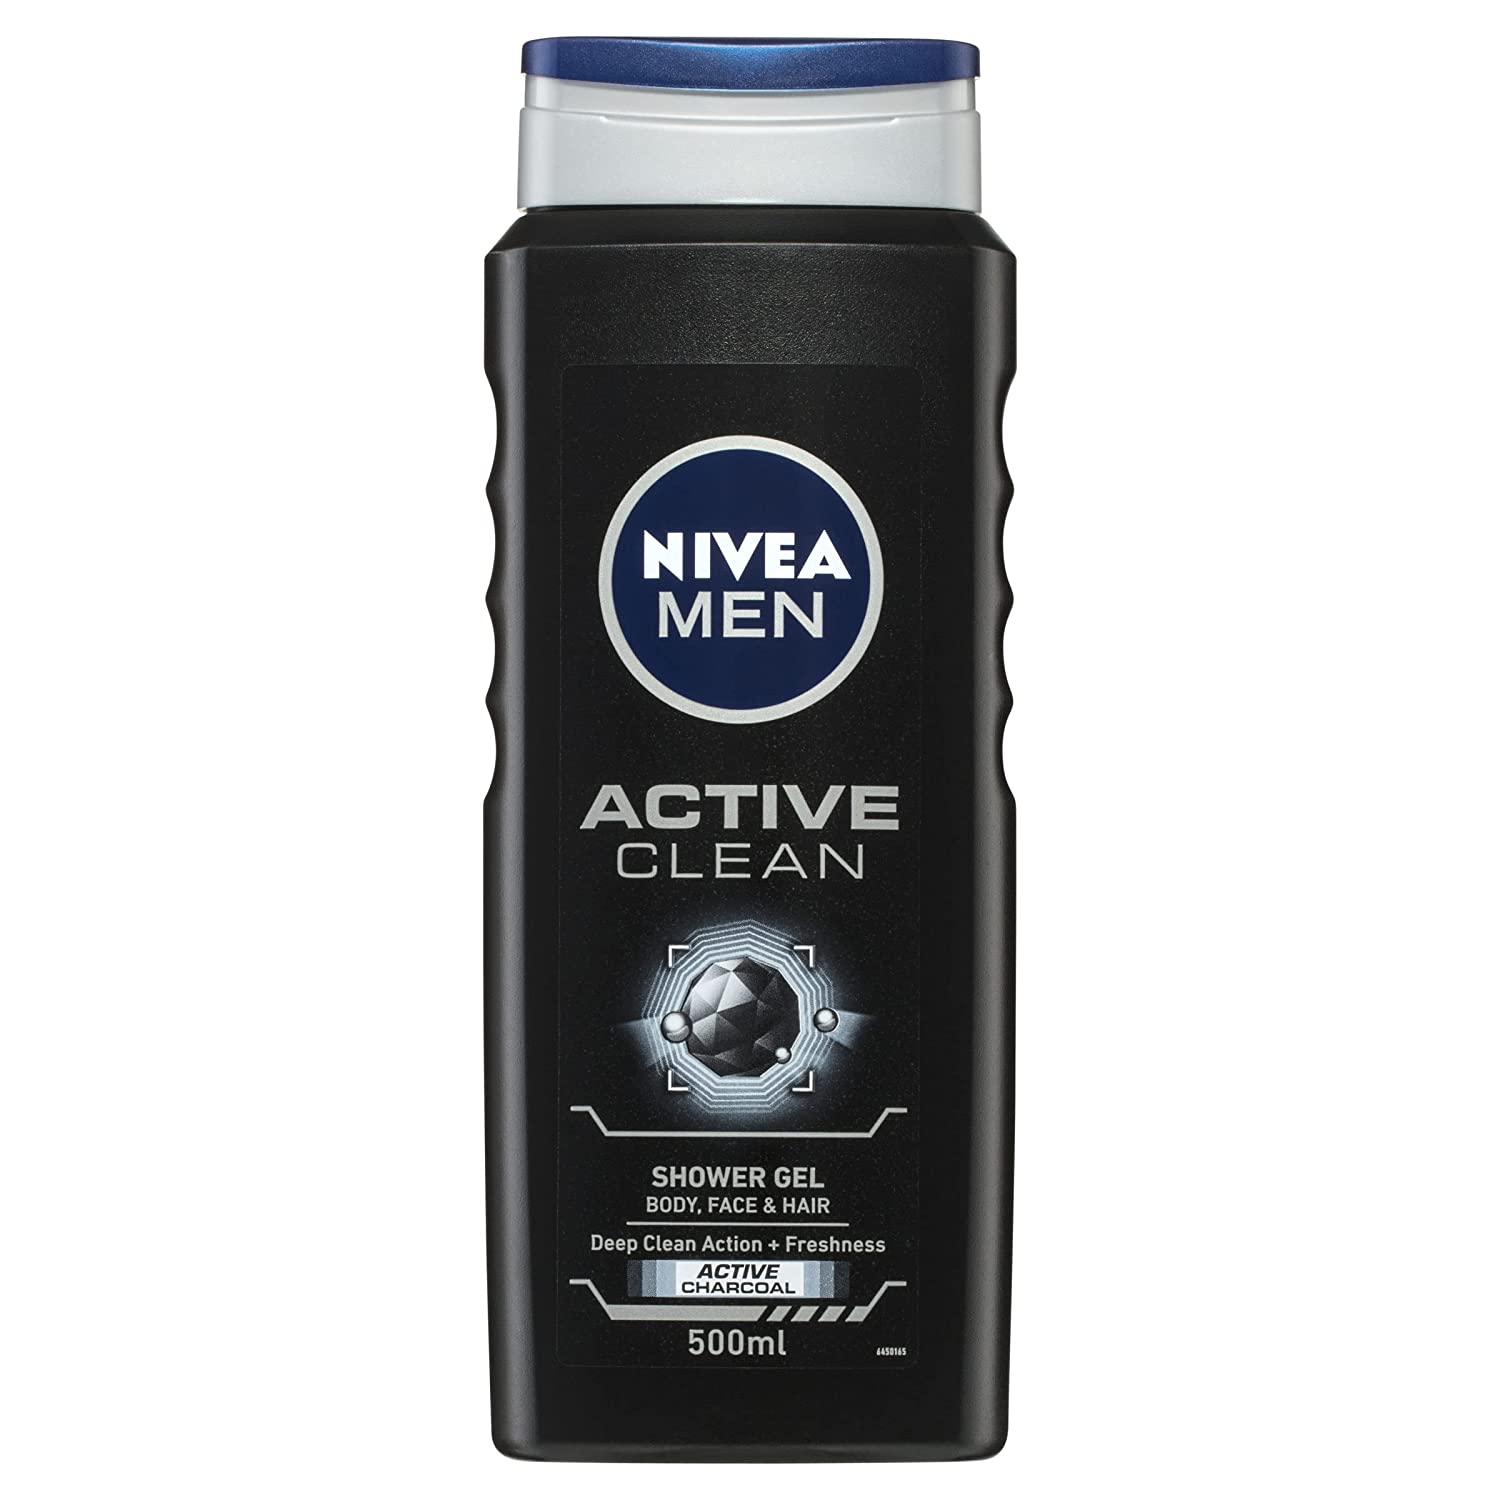 NIVEA Men Body Wash, Active Clean with Active Charcoal, Shower Gel for Body, Face & Hair, 500 ml